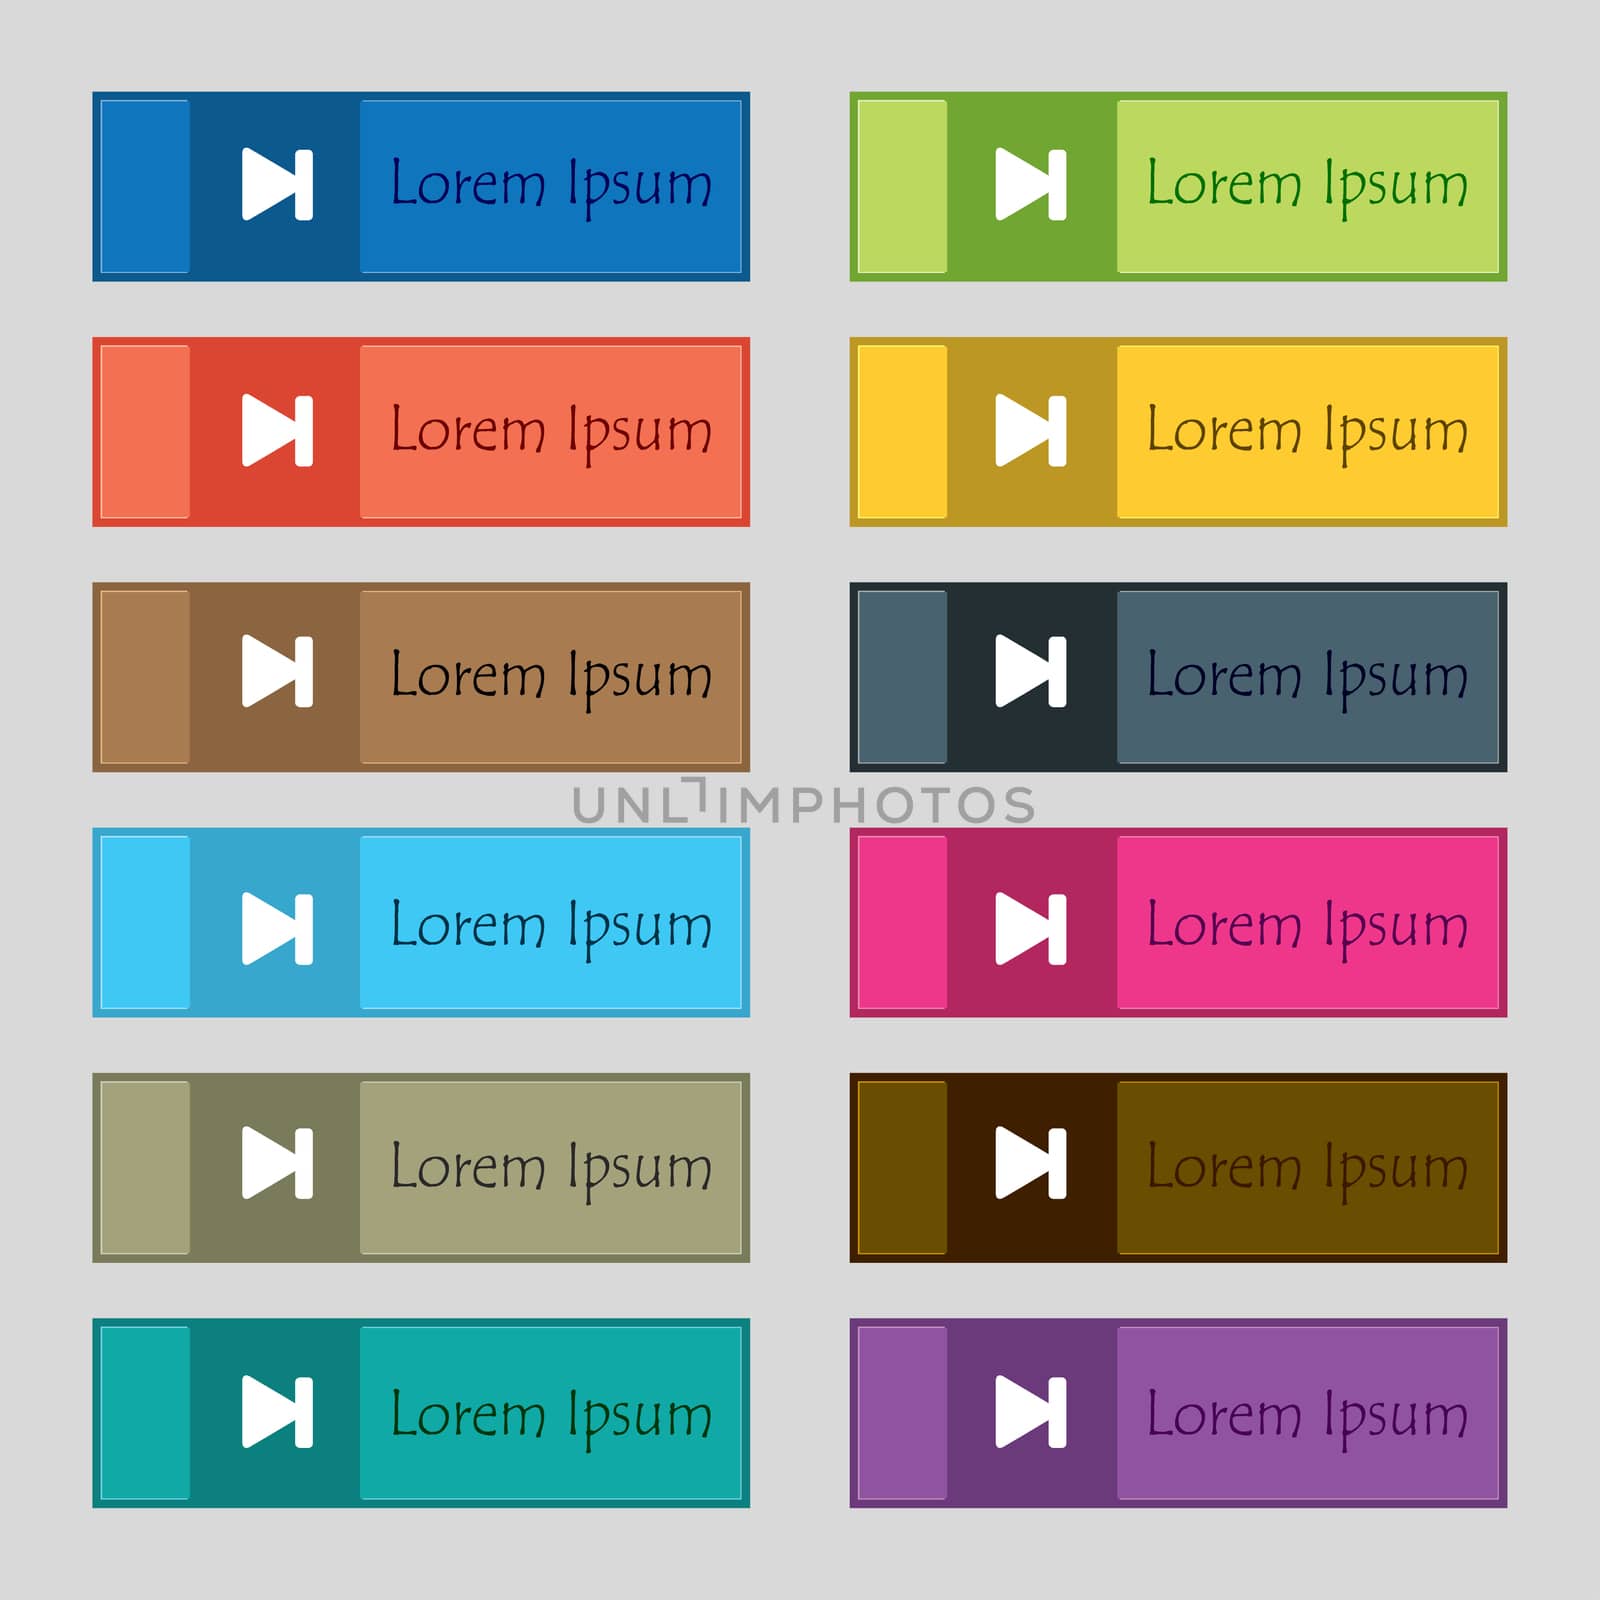 next track icon sign. Set of twelve rectangular, colorful, beautiful, high-quality buttons for the site. illustration